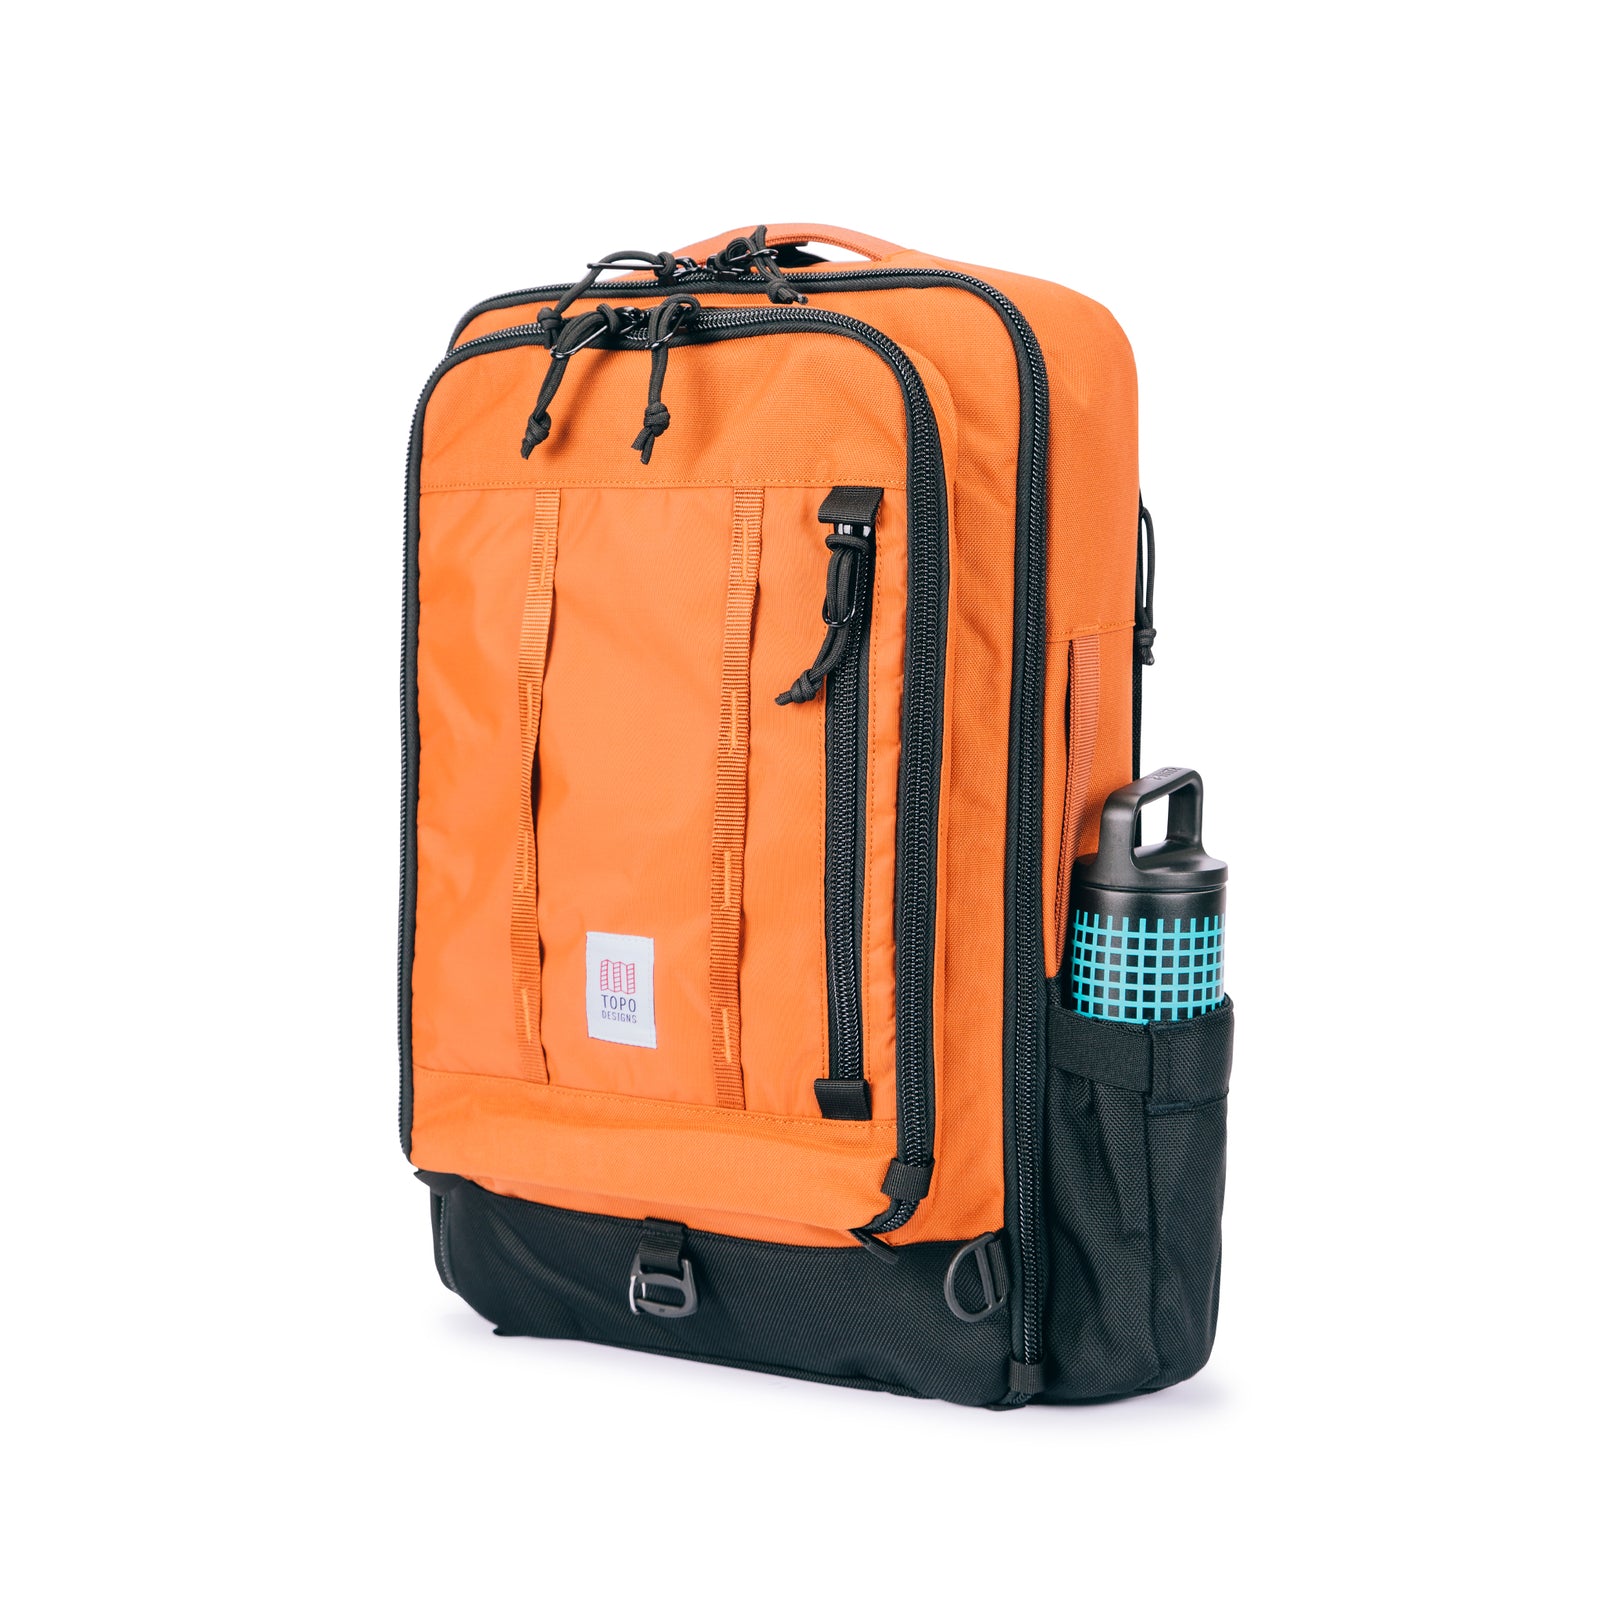 General shot of Topo Designs Global Travel Bag 30L Durable Carry On Convertible Laptop Travel Backpack in Clay orange with water bottle in expandable side pocket.